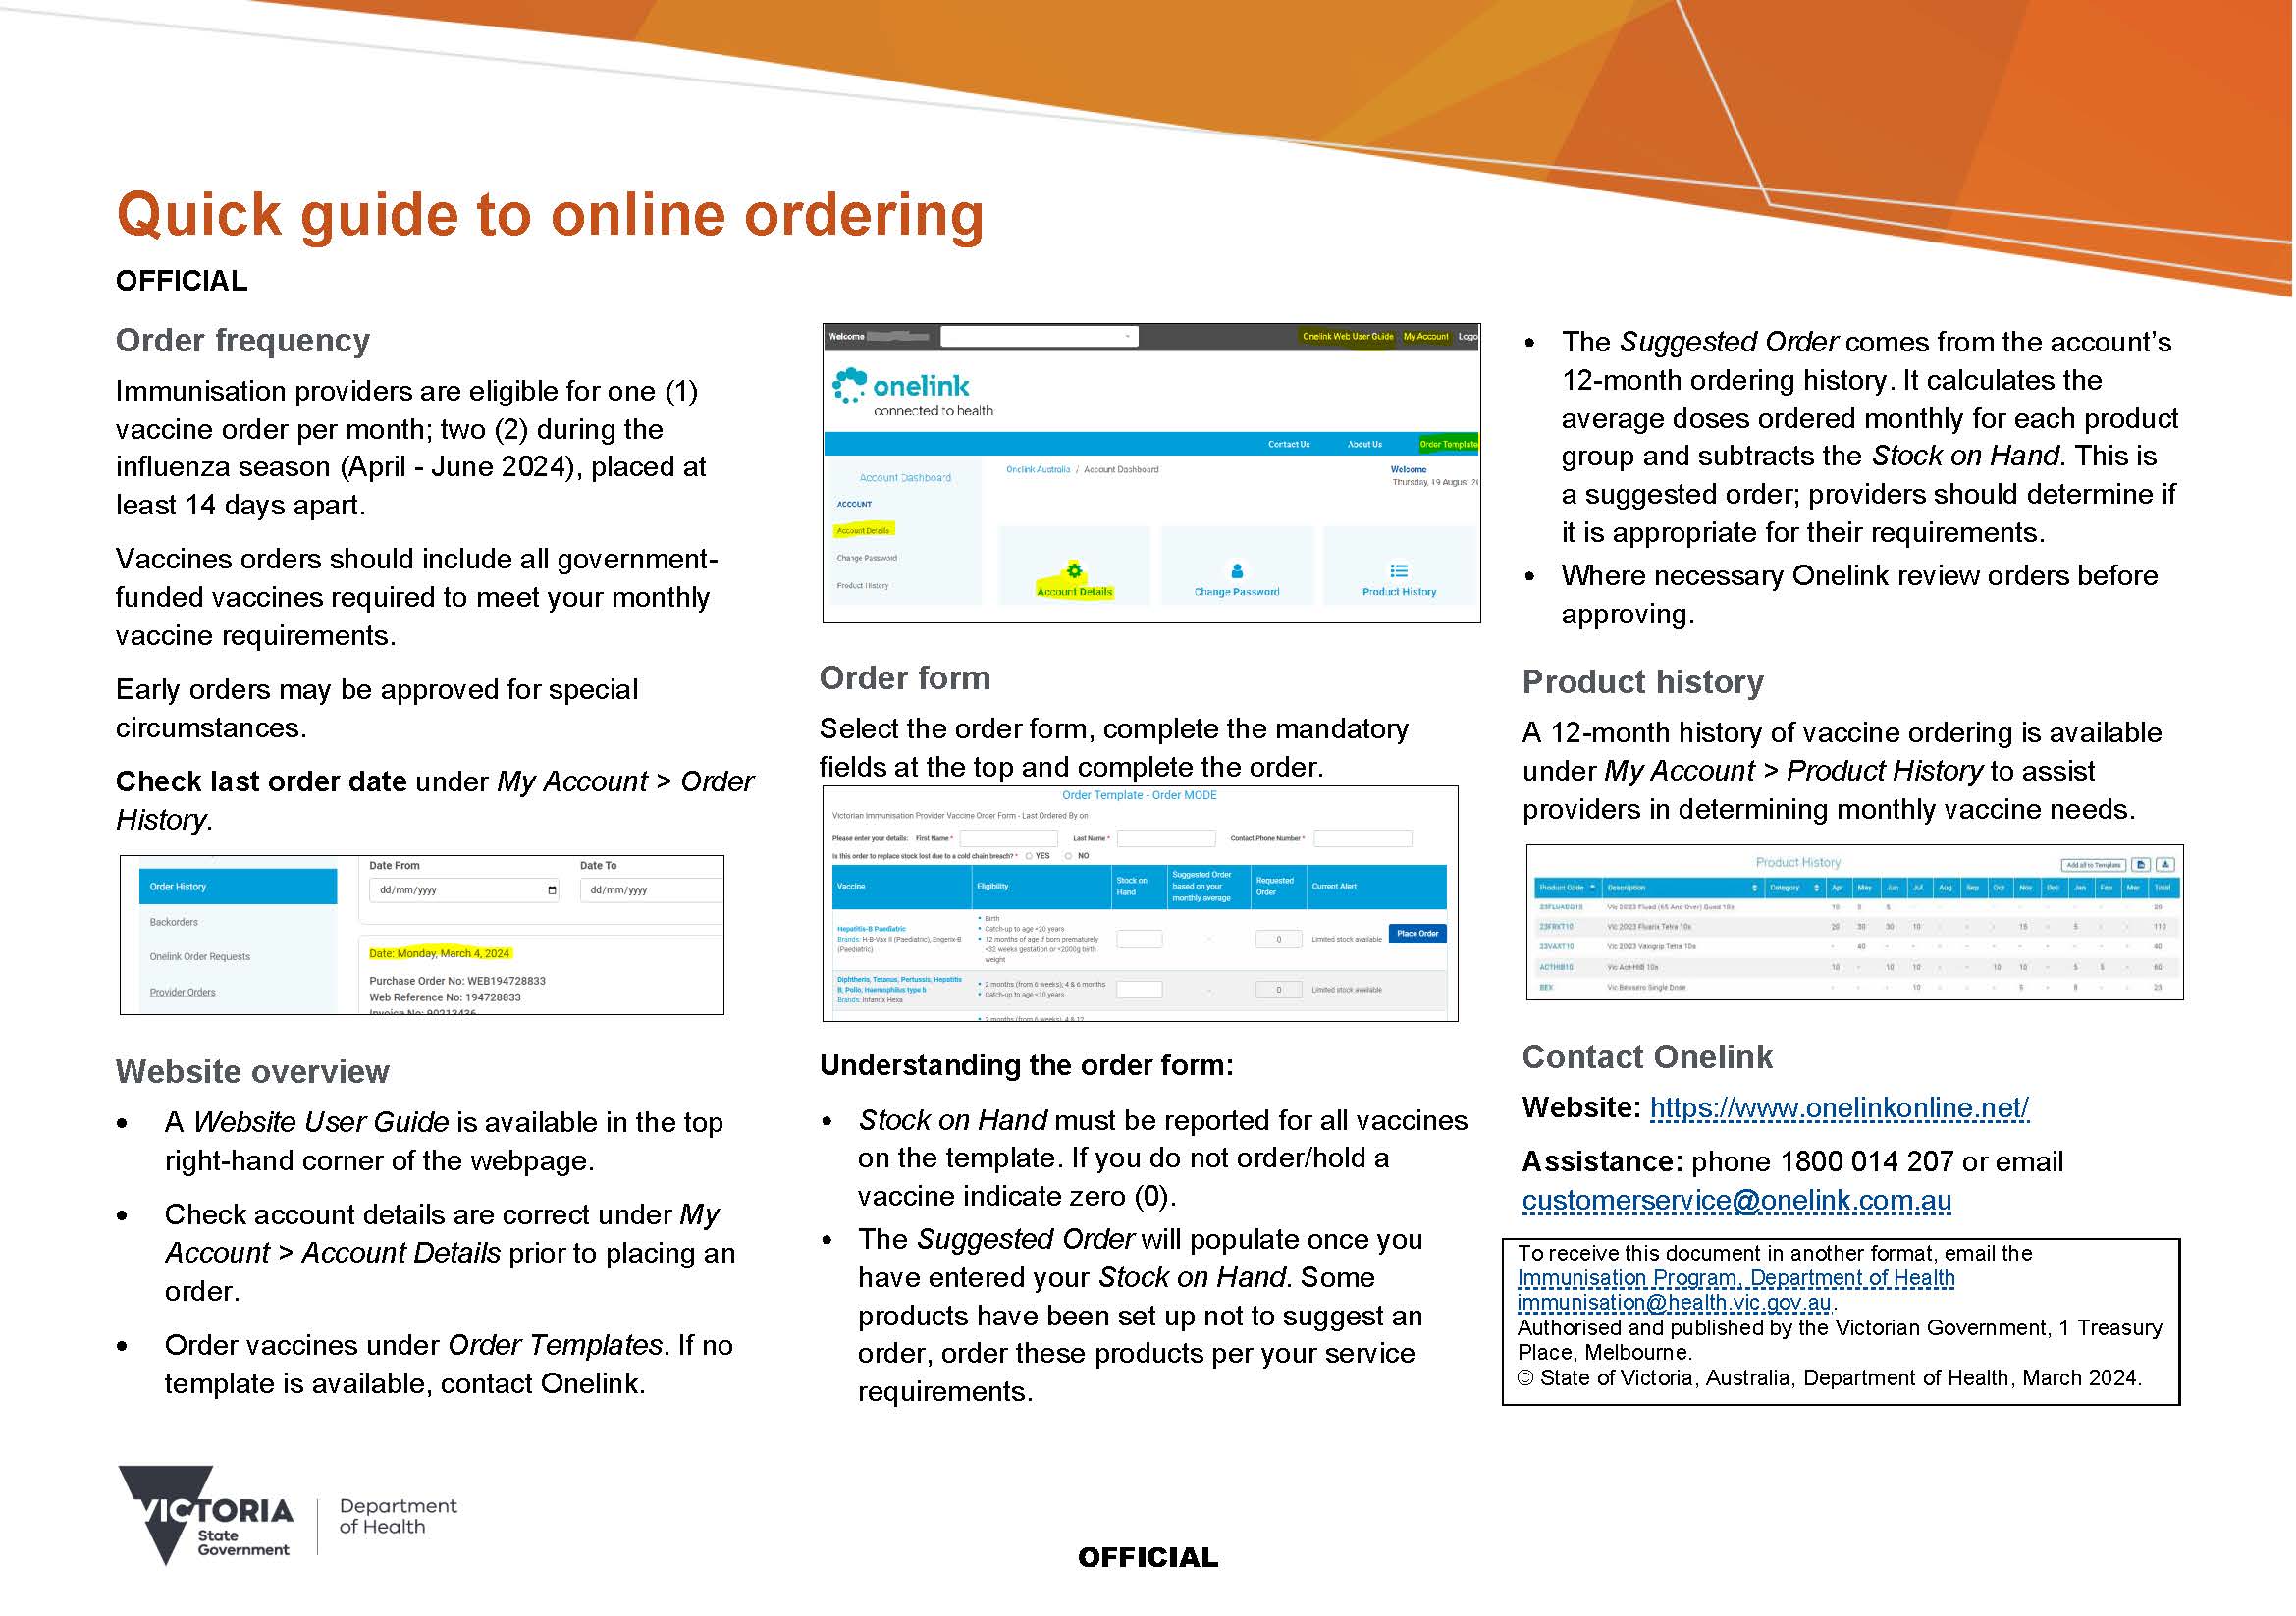 Onelink online ordering - Quick guide to placing an order on online March 2024.jpg